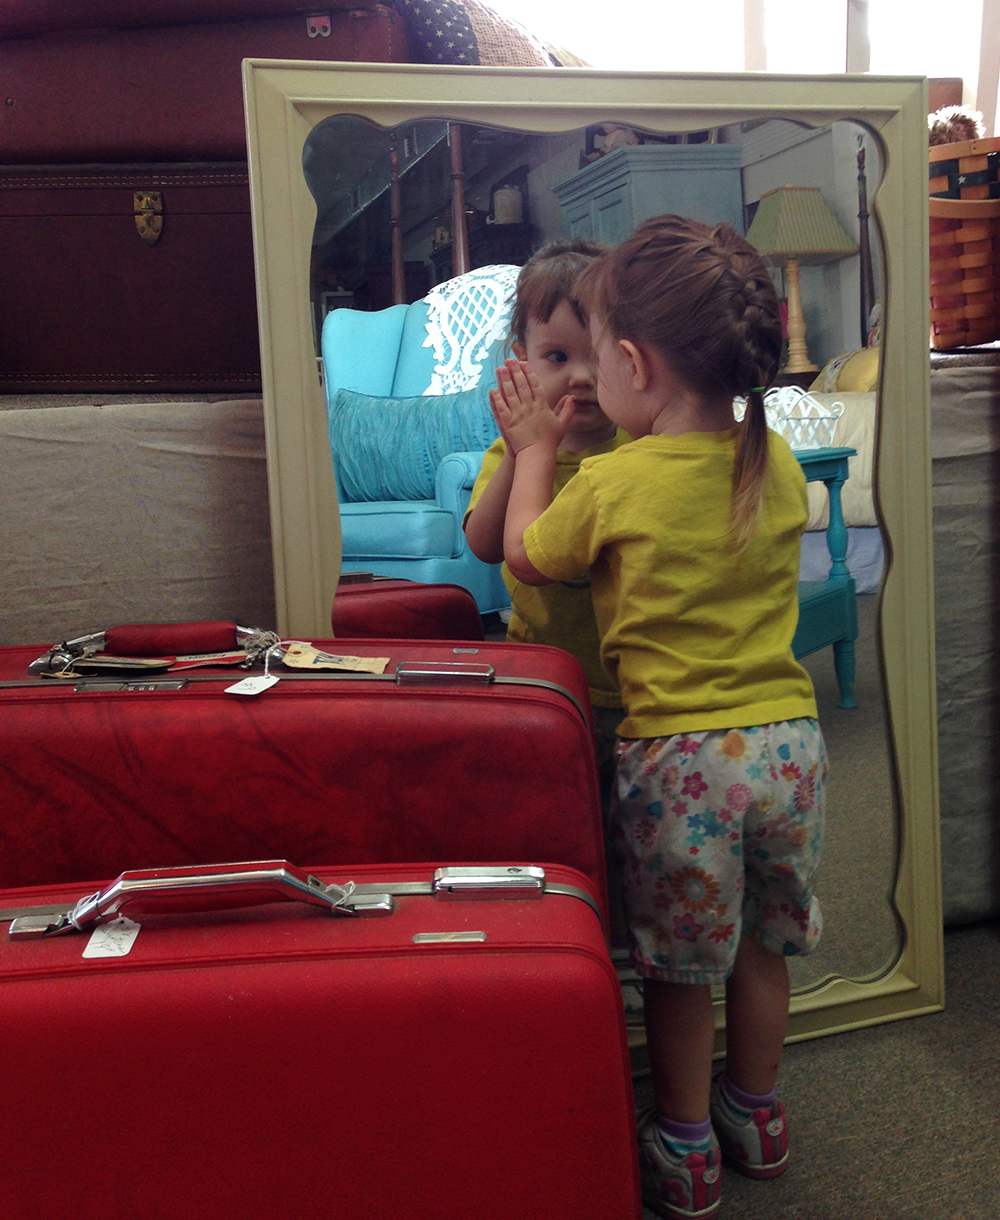 Joy looking in vintage mirror - Art Inspiration and Thrift Store